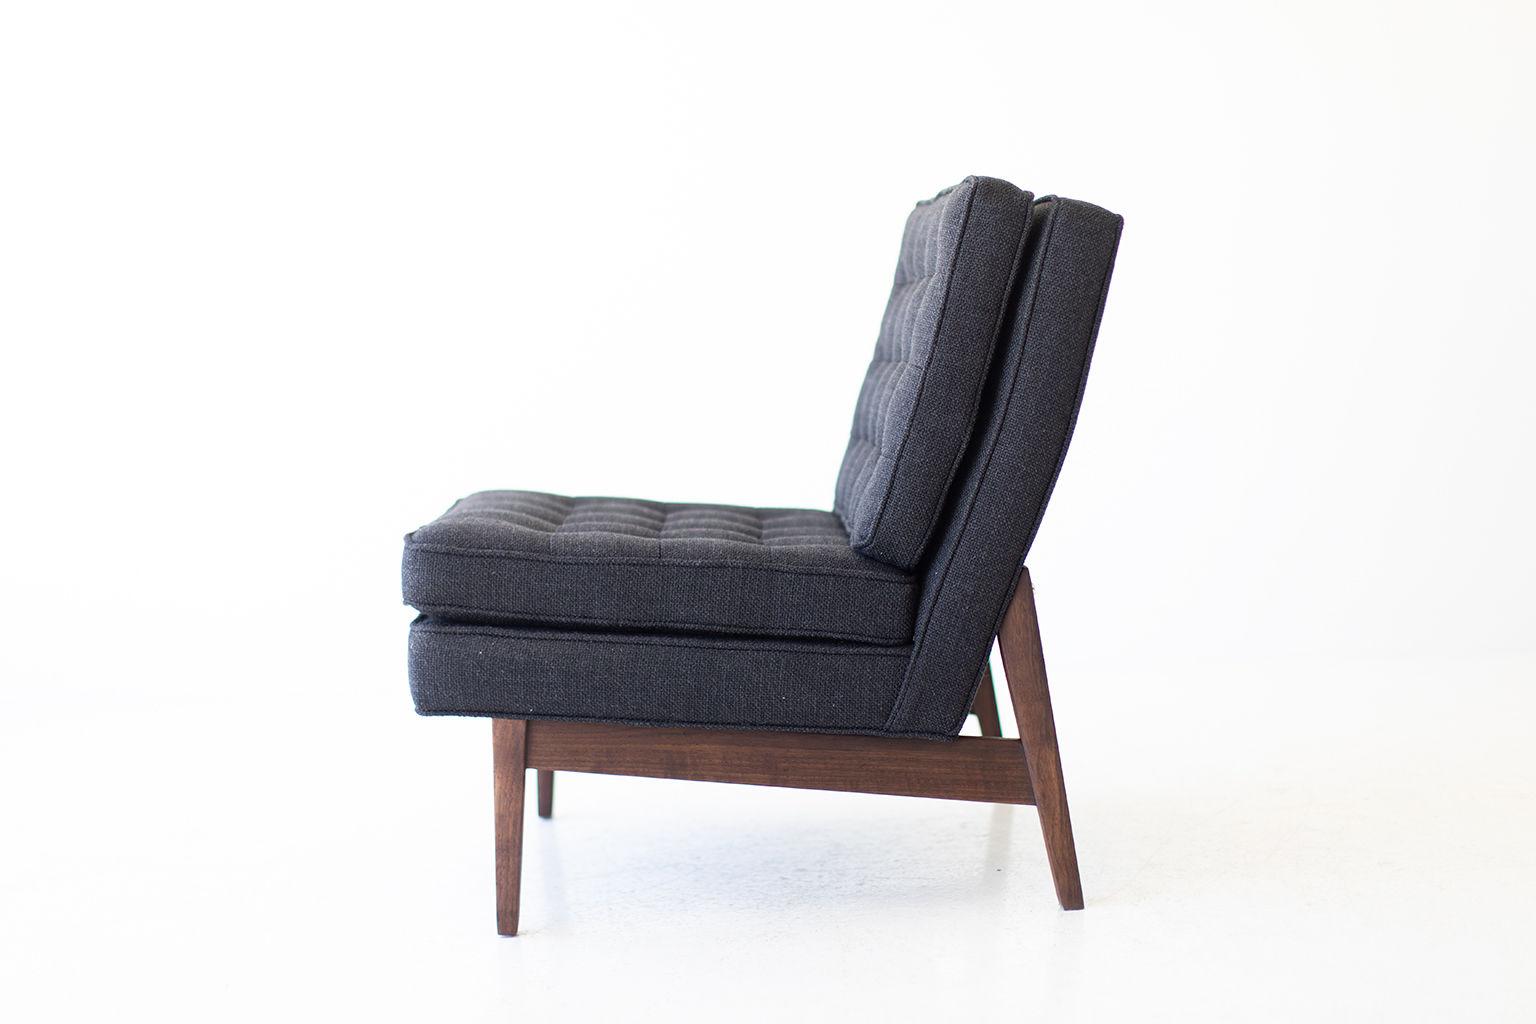 Designer: Jack Cartwright

Manufacturer: Founders Furniture.
Period or model: Mid-Century Modern.
Specs: Walnut, Thick weave.

Condition:

This Jack Cartwright slipper chair for Founders Furniture is in excellent restored condition. The